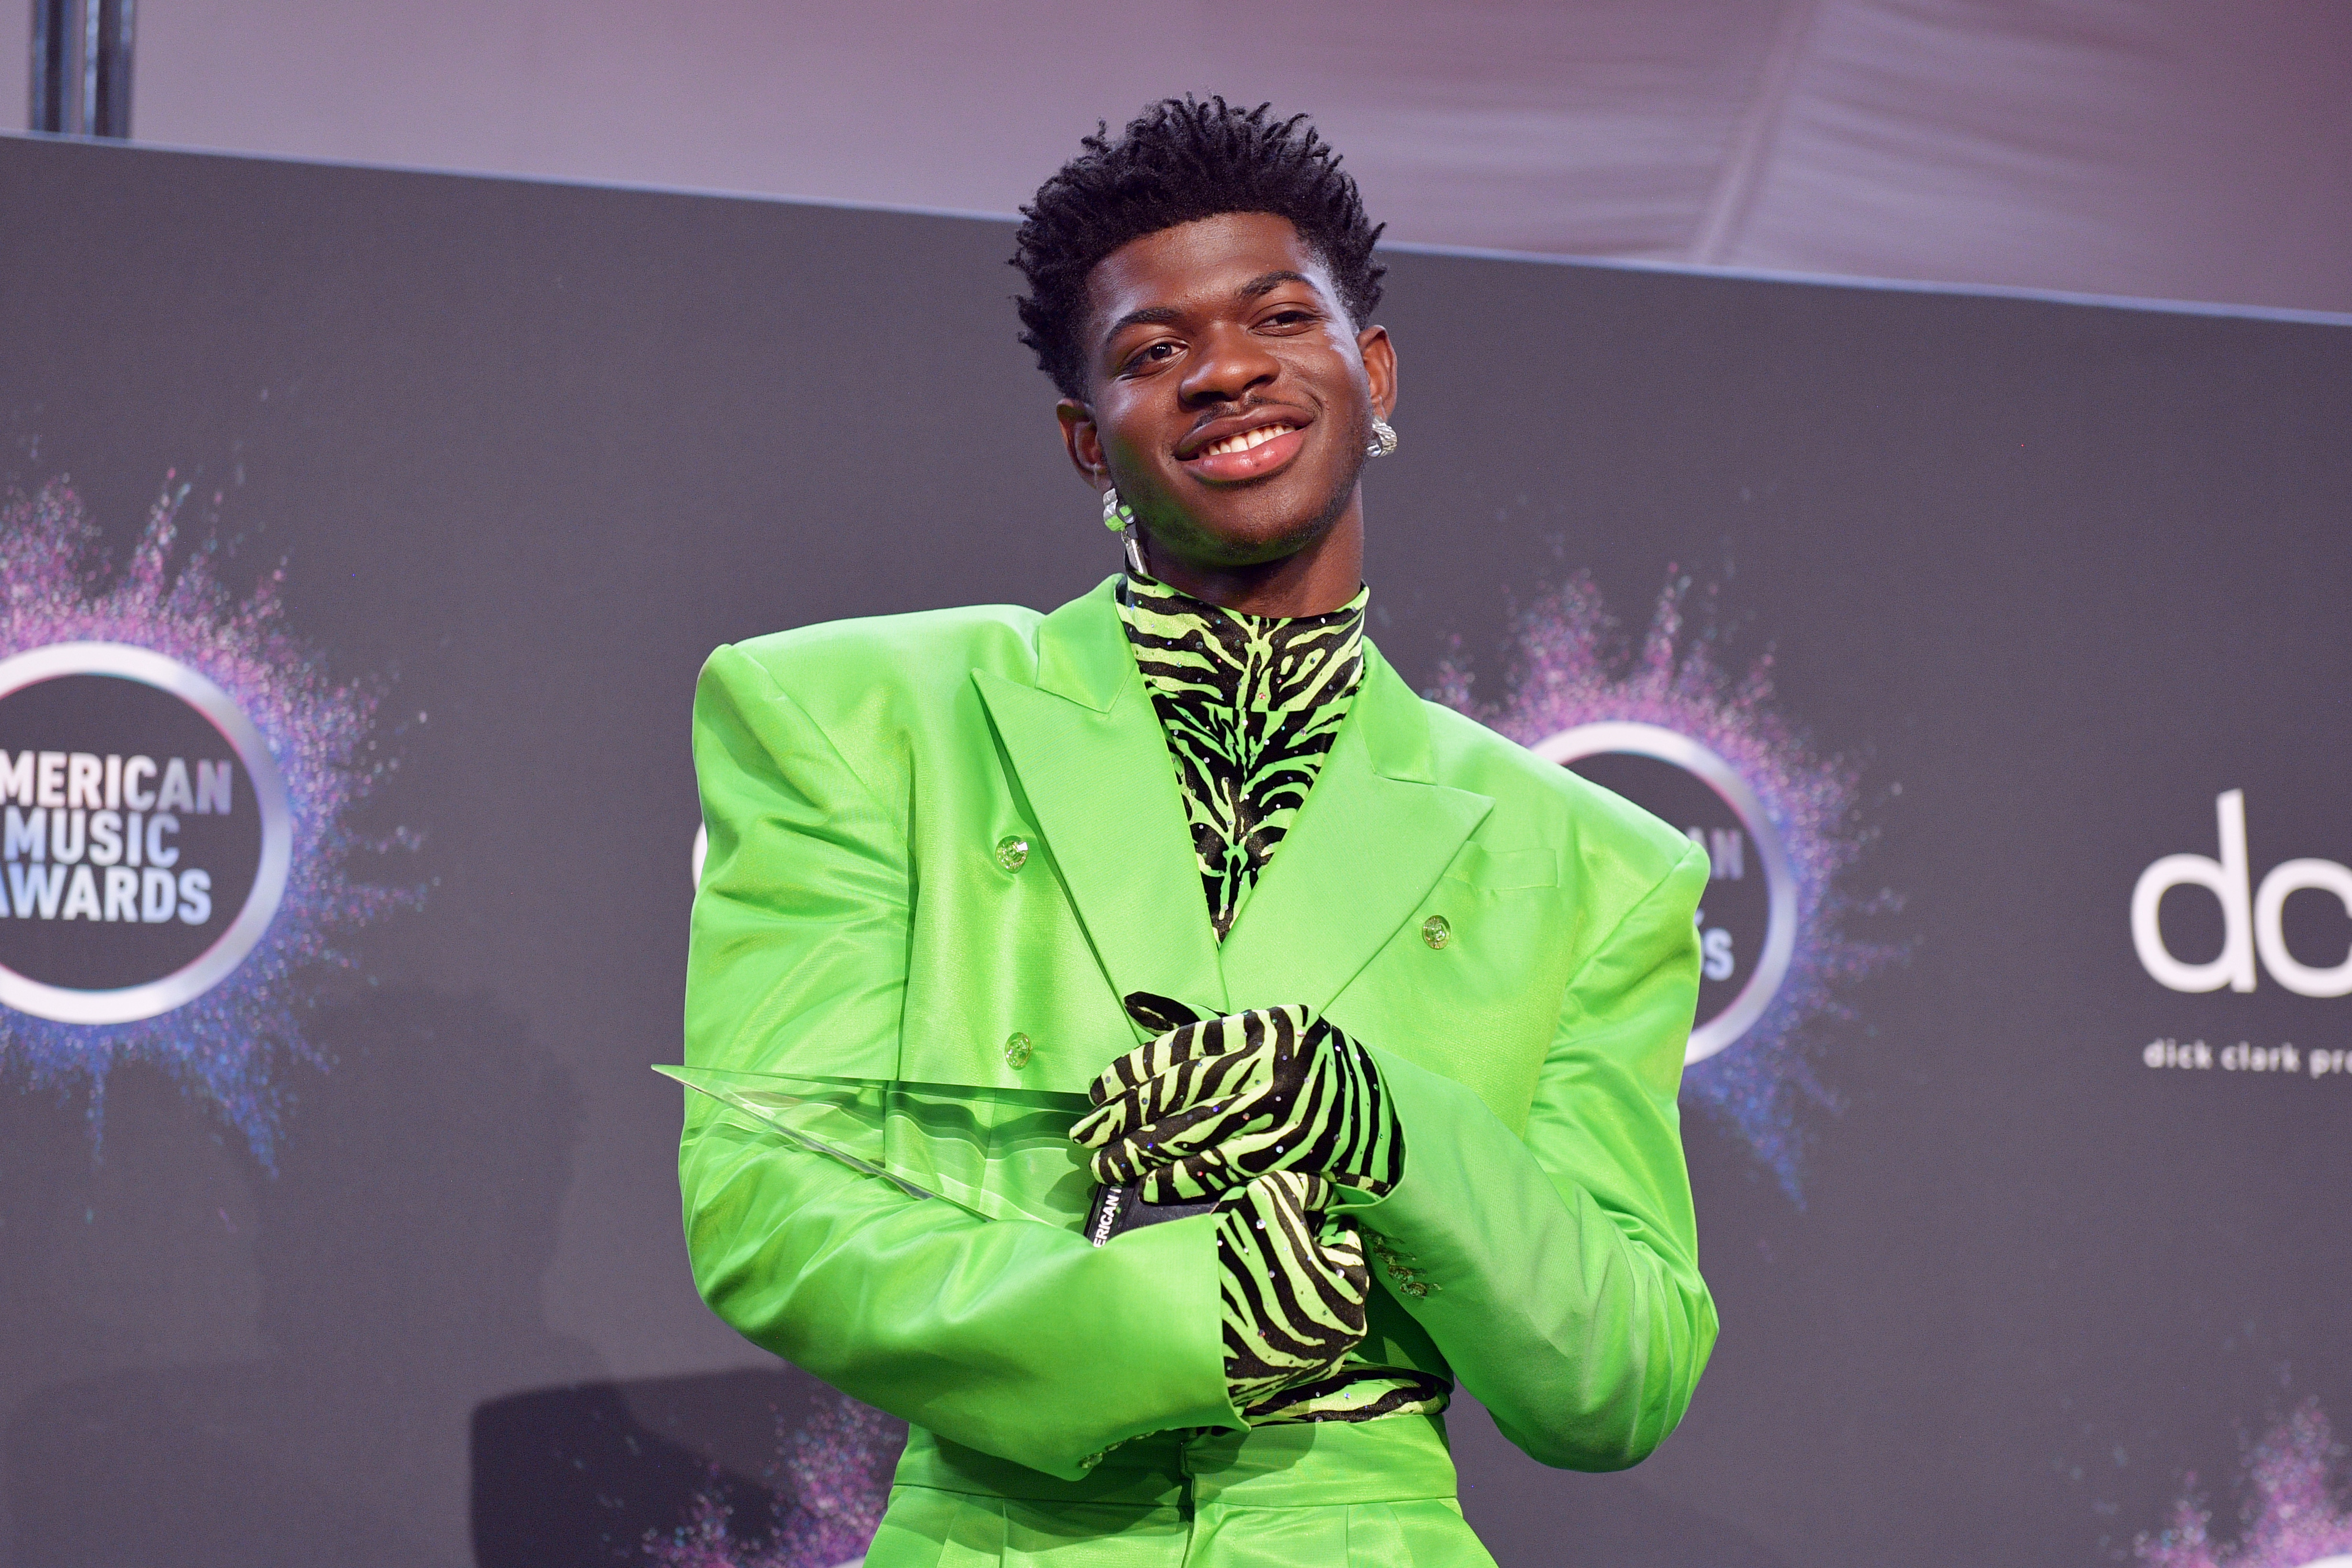 Lil Nas X Says 2020 Will Bring “Amazing Surprises” For His Fans